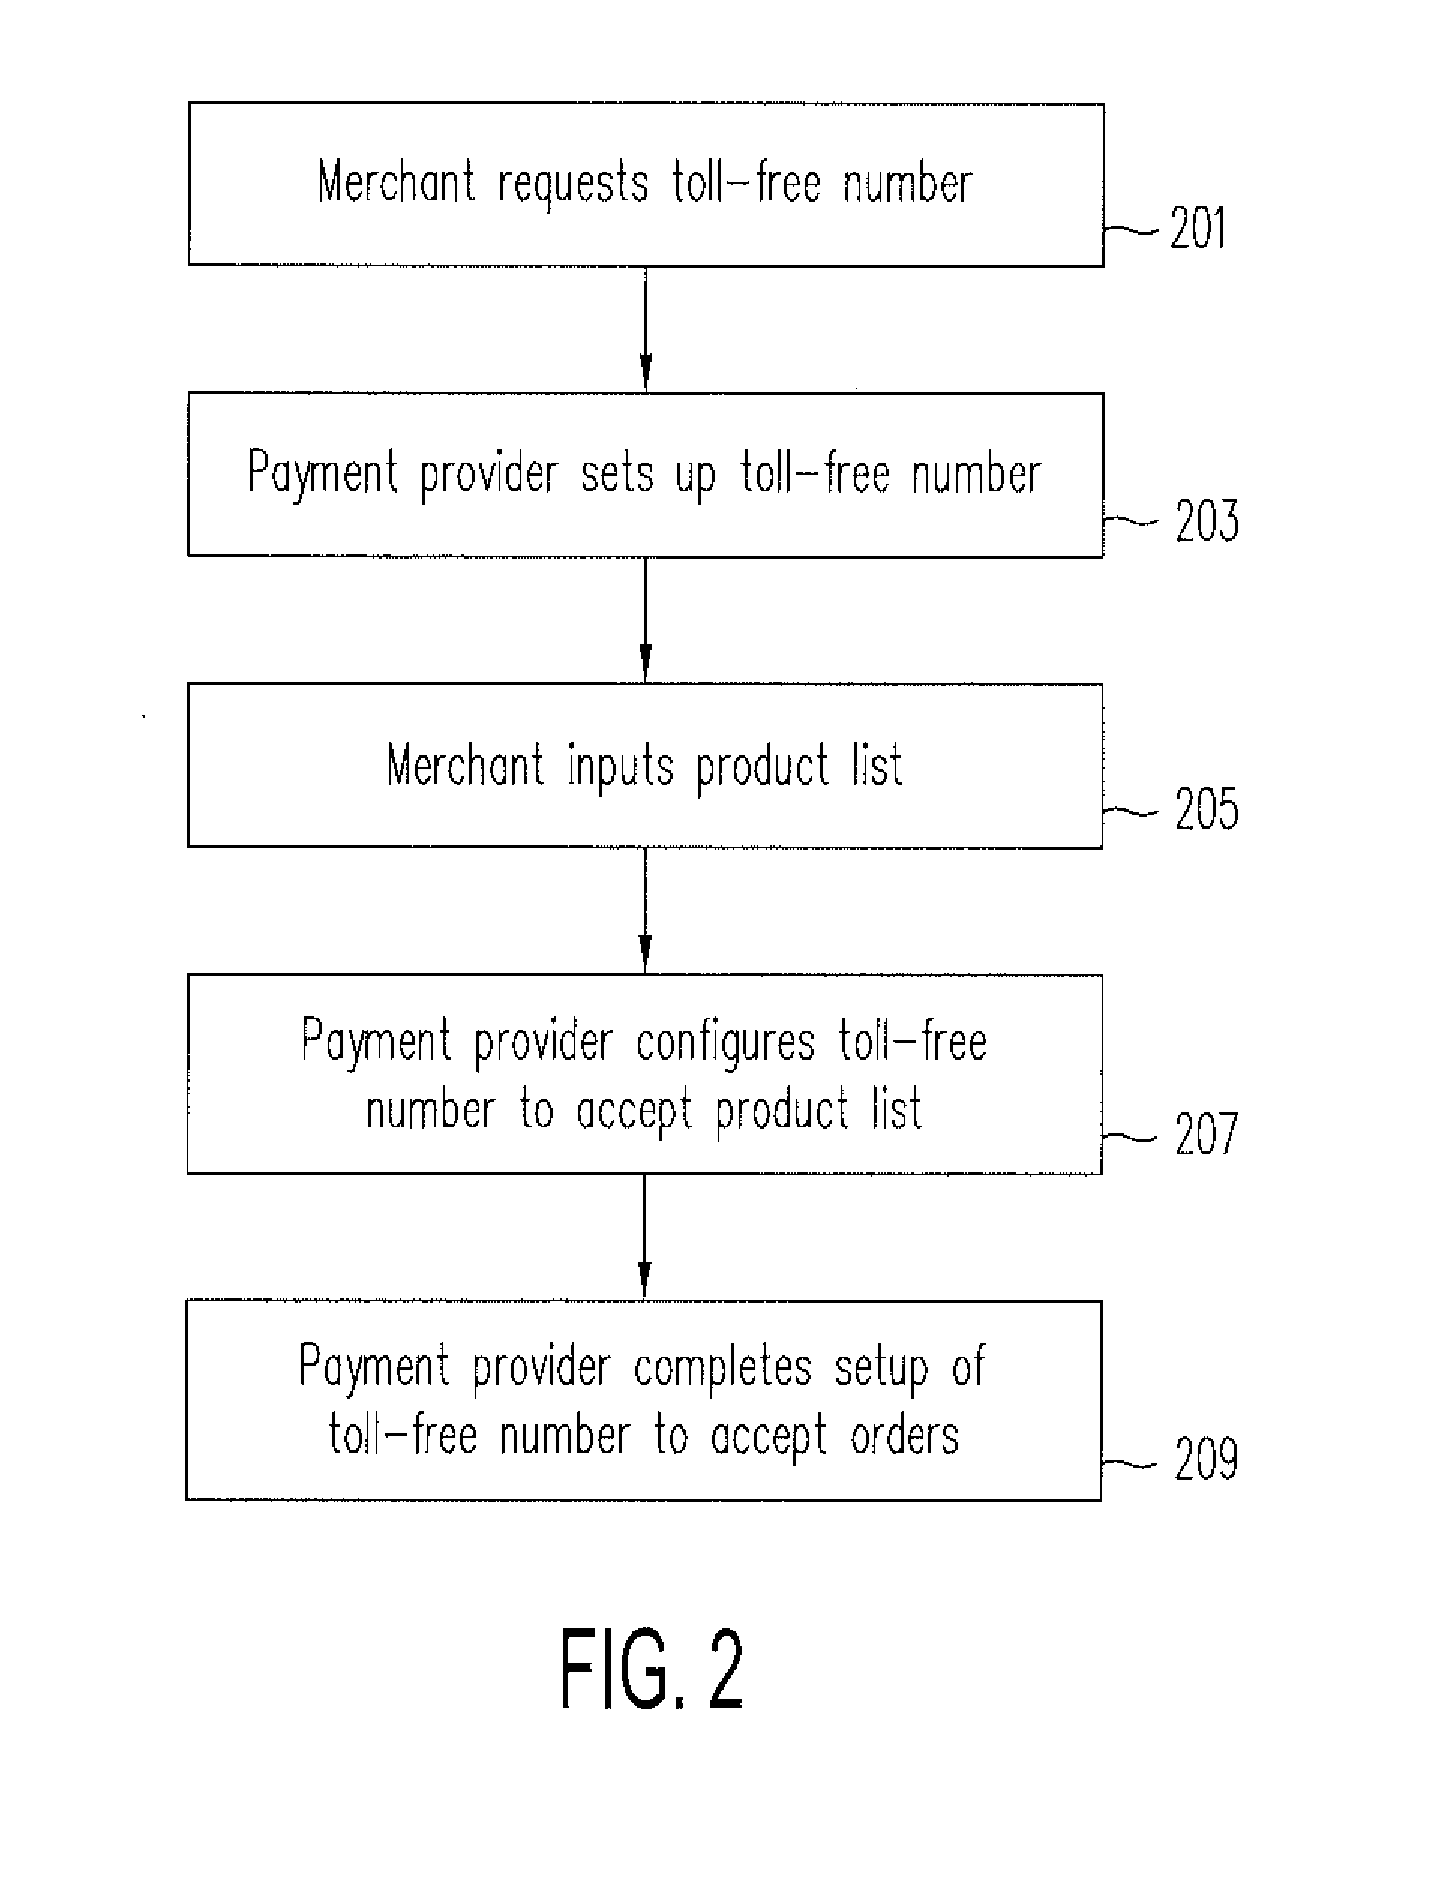 Systems and Methods for a Merchant to Accept Telephone Orders and Process Payments